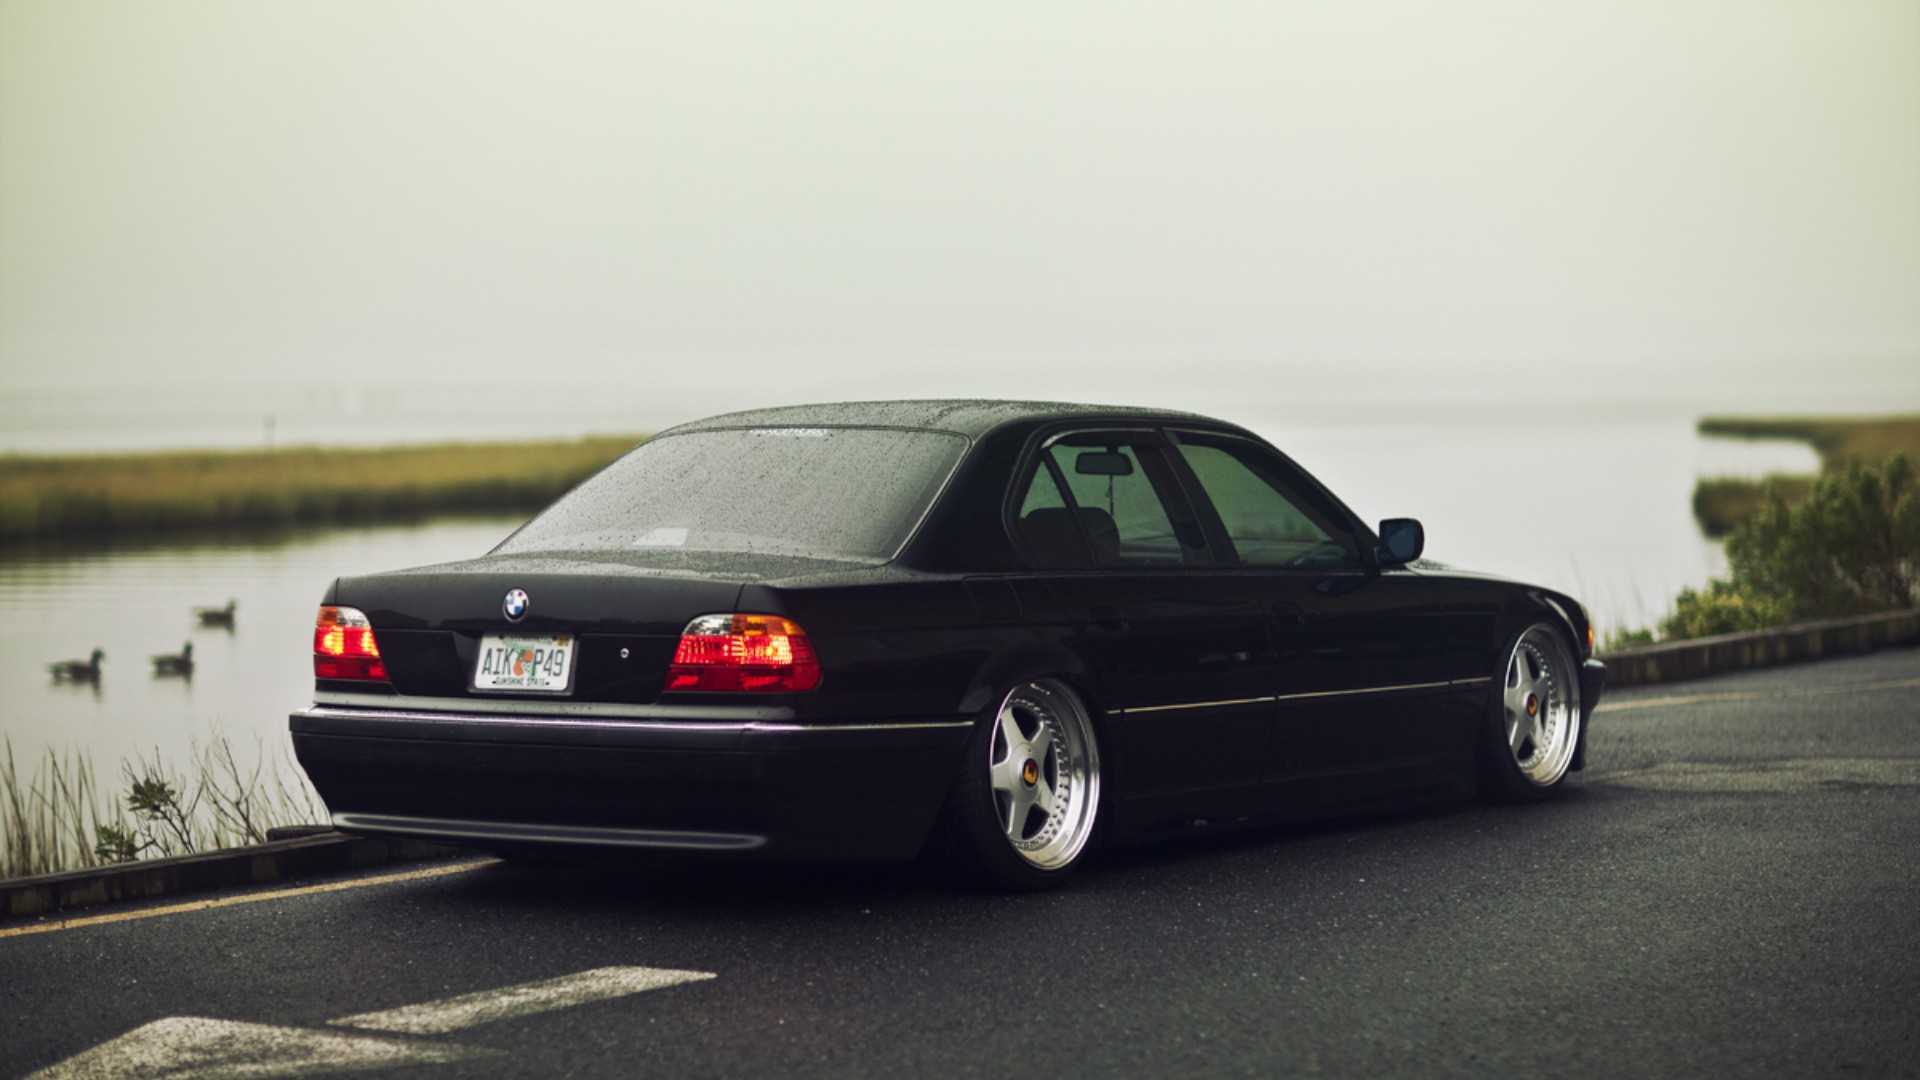 Stance - Bmw 7 Series Stance , HD Wallpaper & Backgrounds